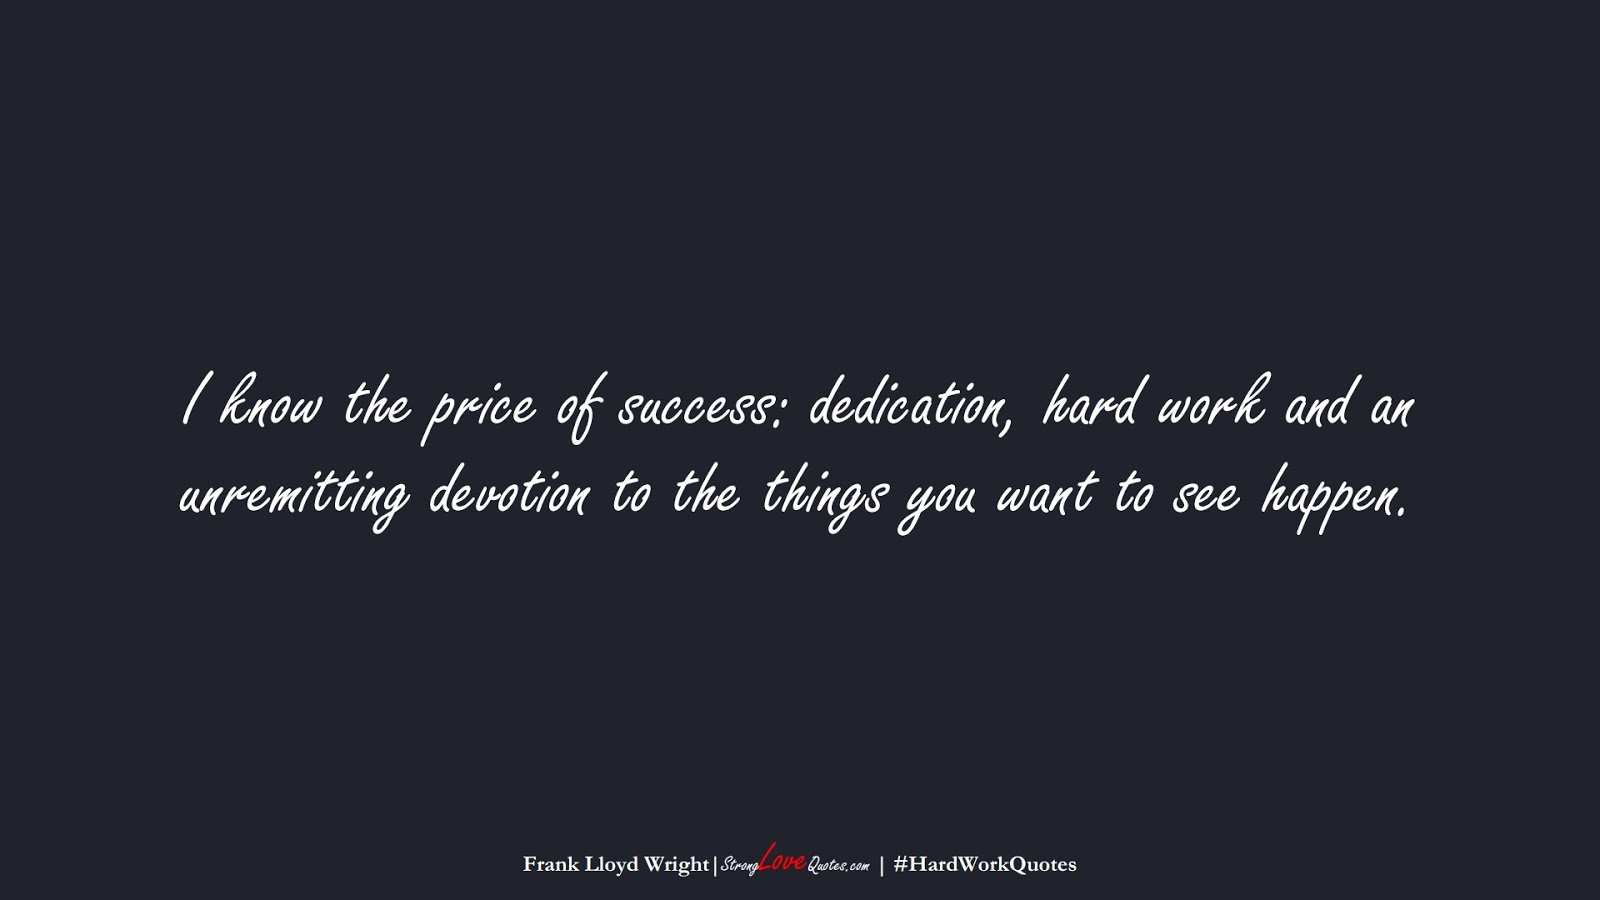 I know the price of success: dedication, hard work and an unremitting devotion to the things you want to see happen. (Frank Lloyd Wright);  #HardWorkQuotes